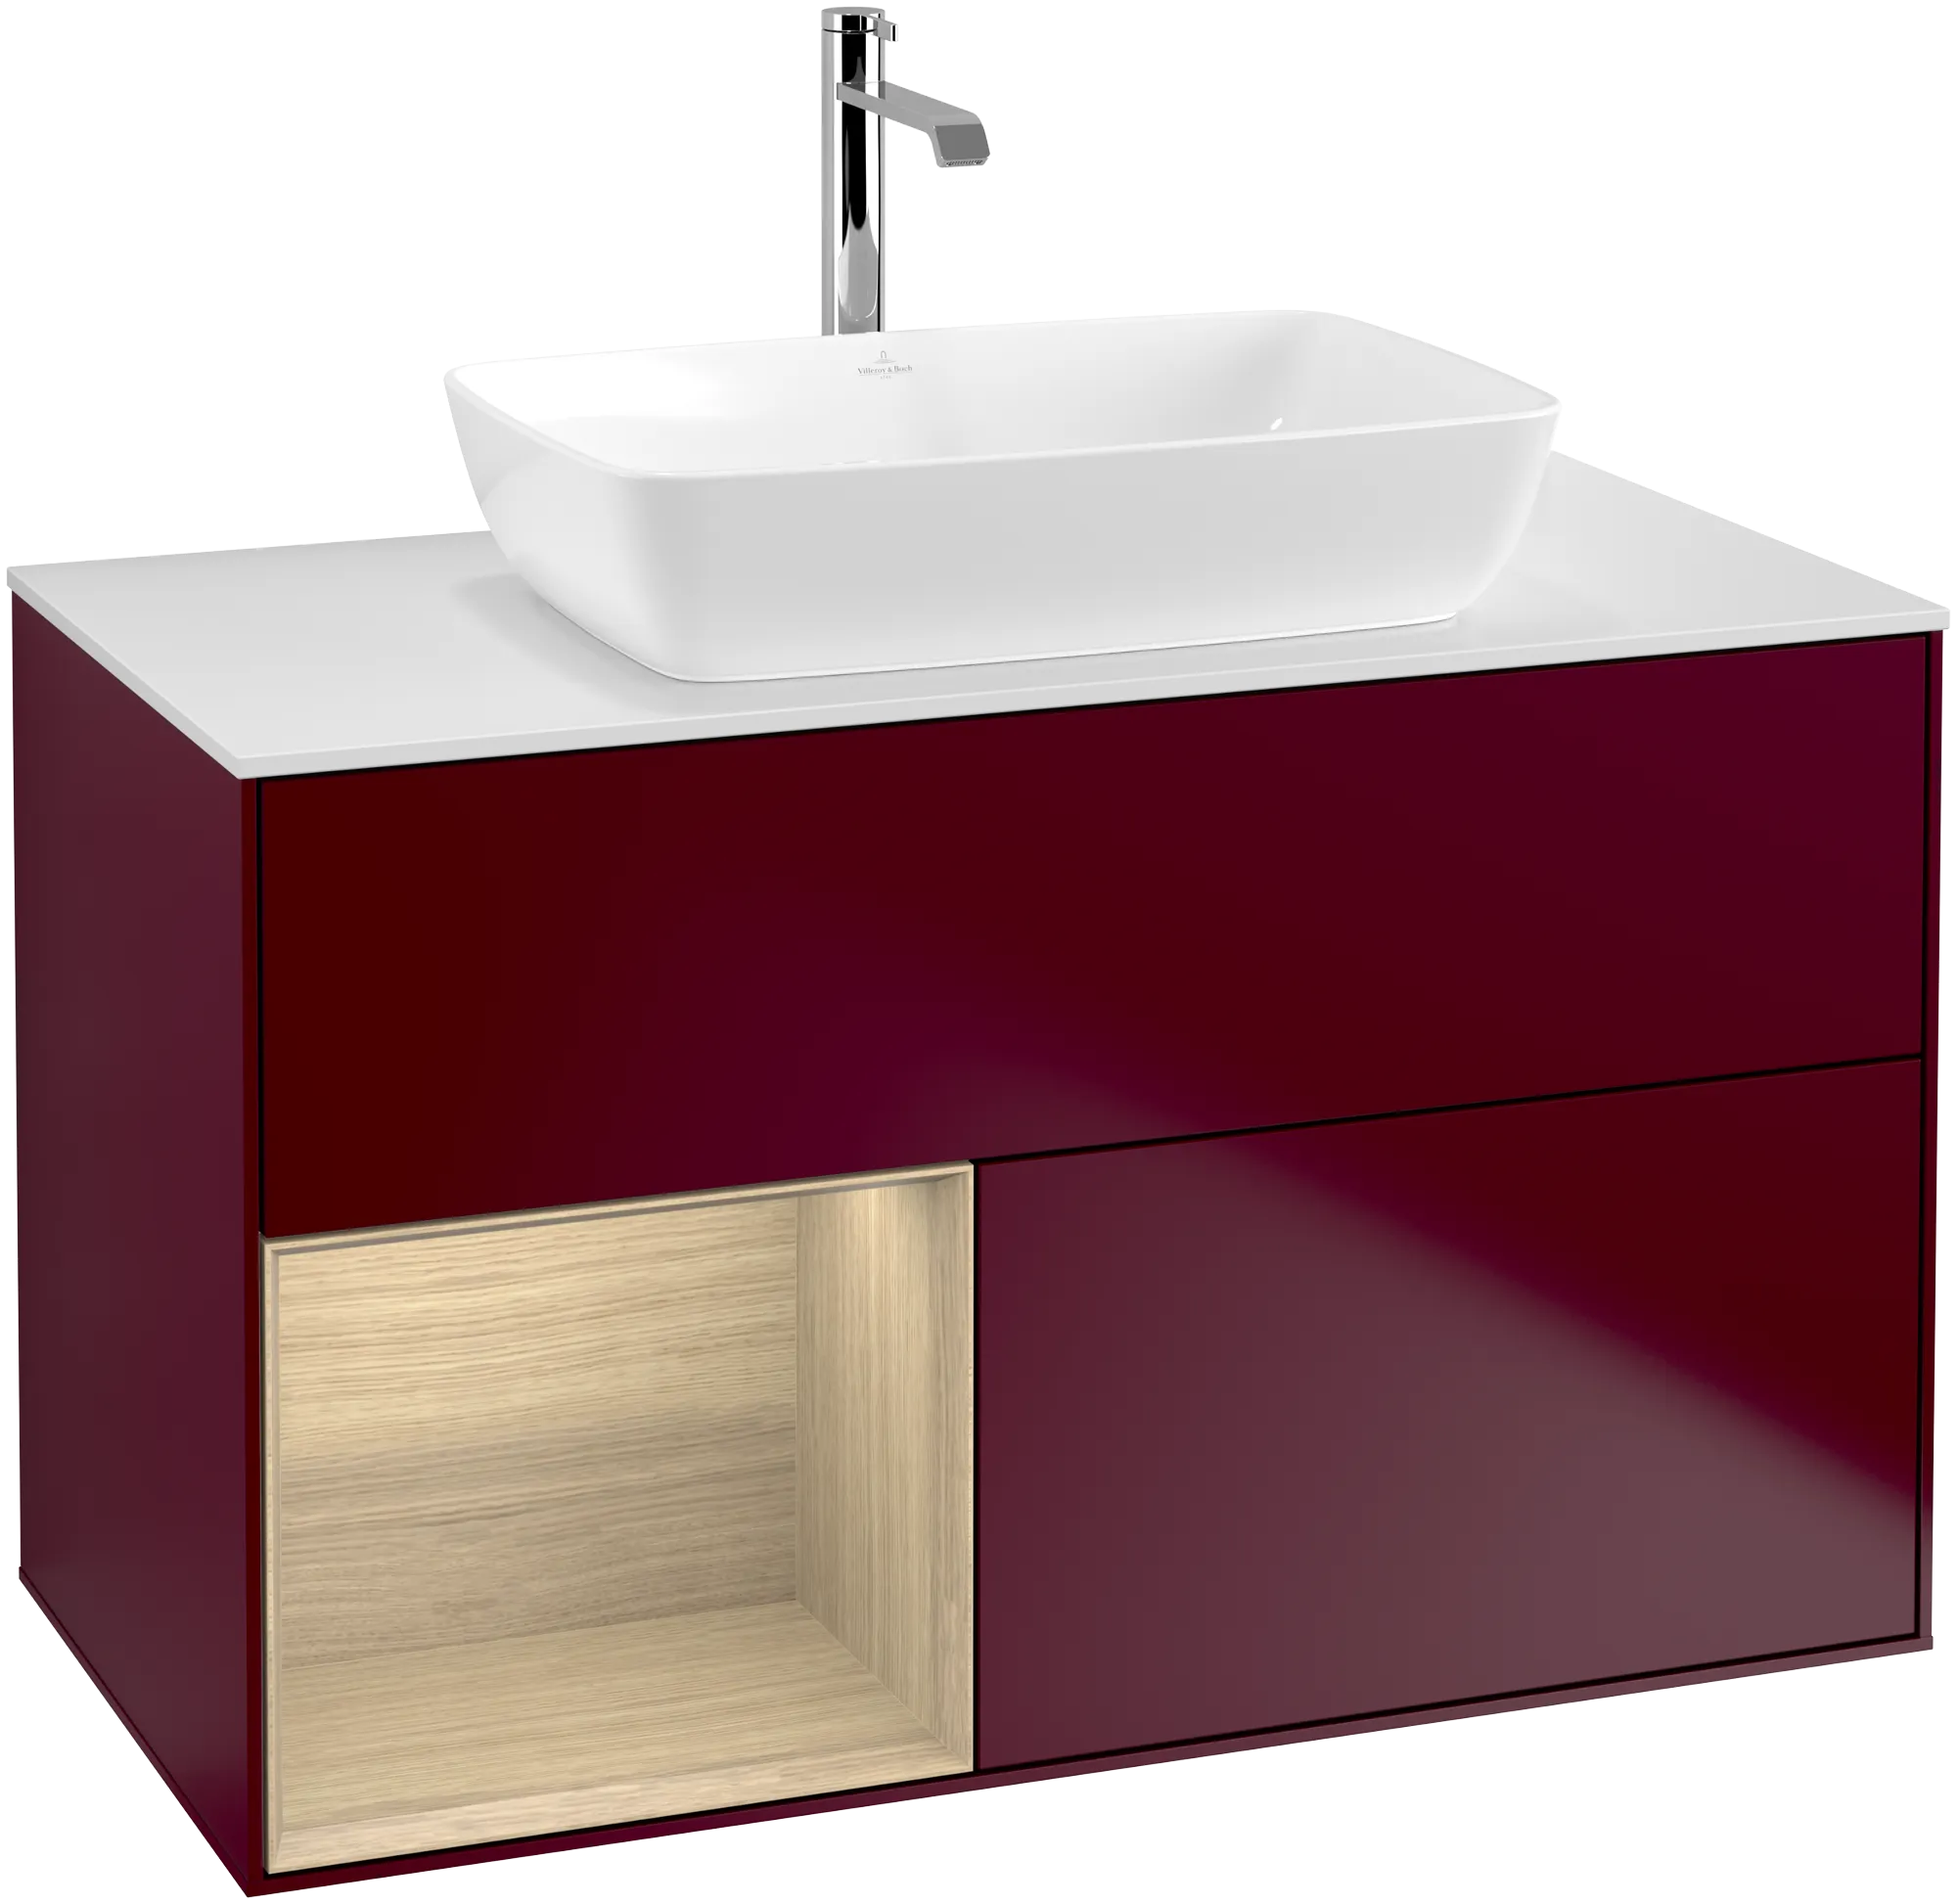 Picture of VILLEROY BOCH Finion Vanity unit, with lighting, 2 pull-out compartments, 1000 x 603 x 501 mm, Peony Matt Lacquer / Oak Veneer / Glass White Matt #G771PCHB